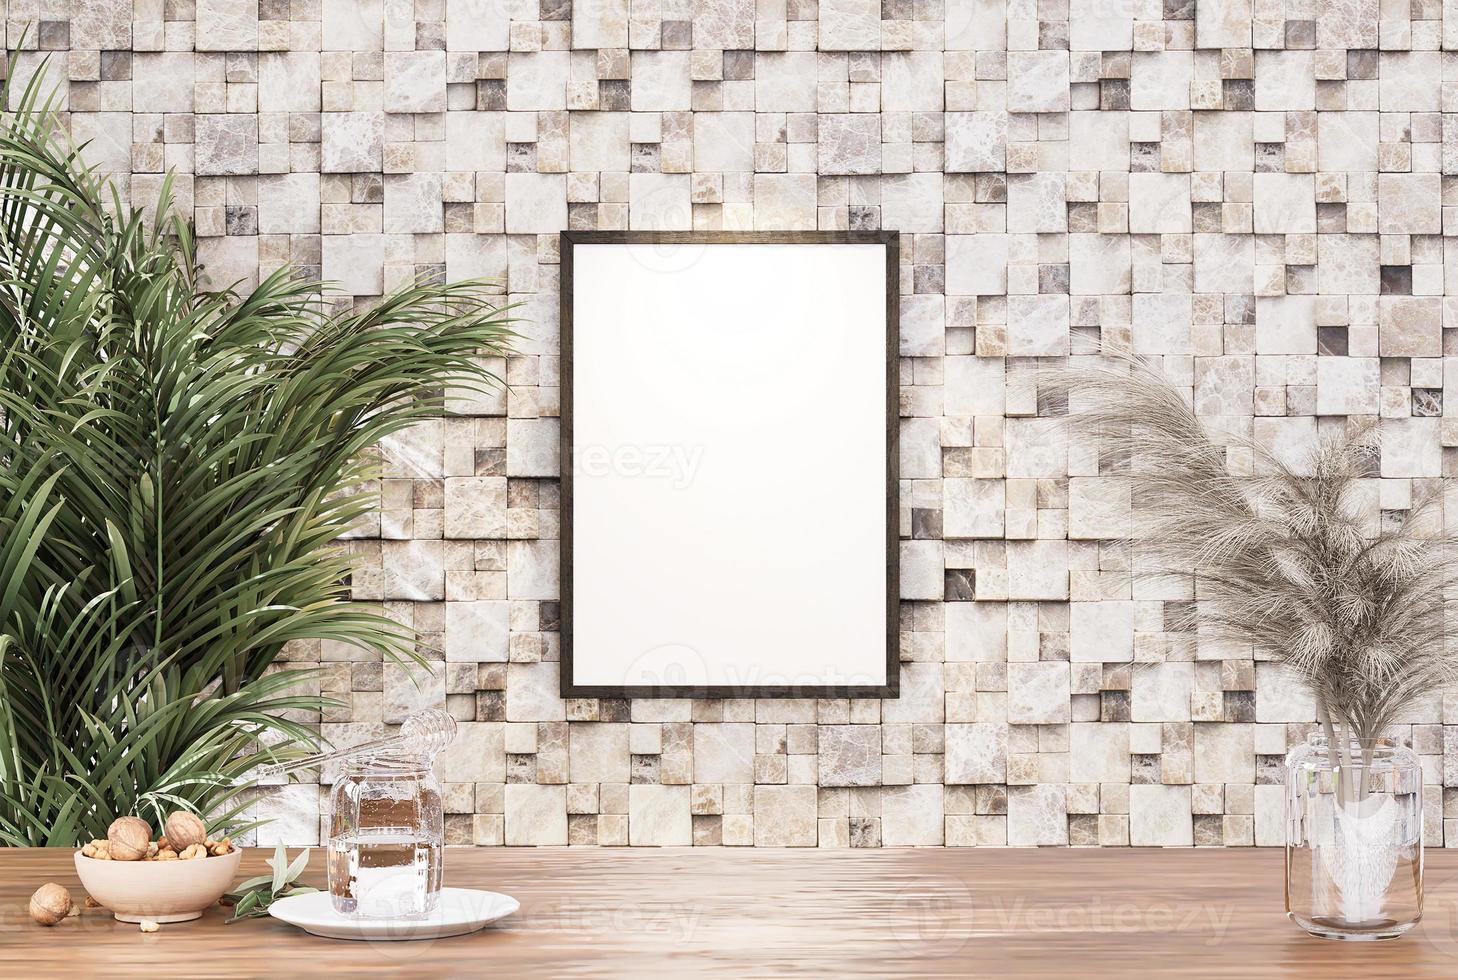 Empty room photo frame with tile wall, interior background image.